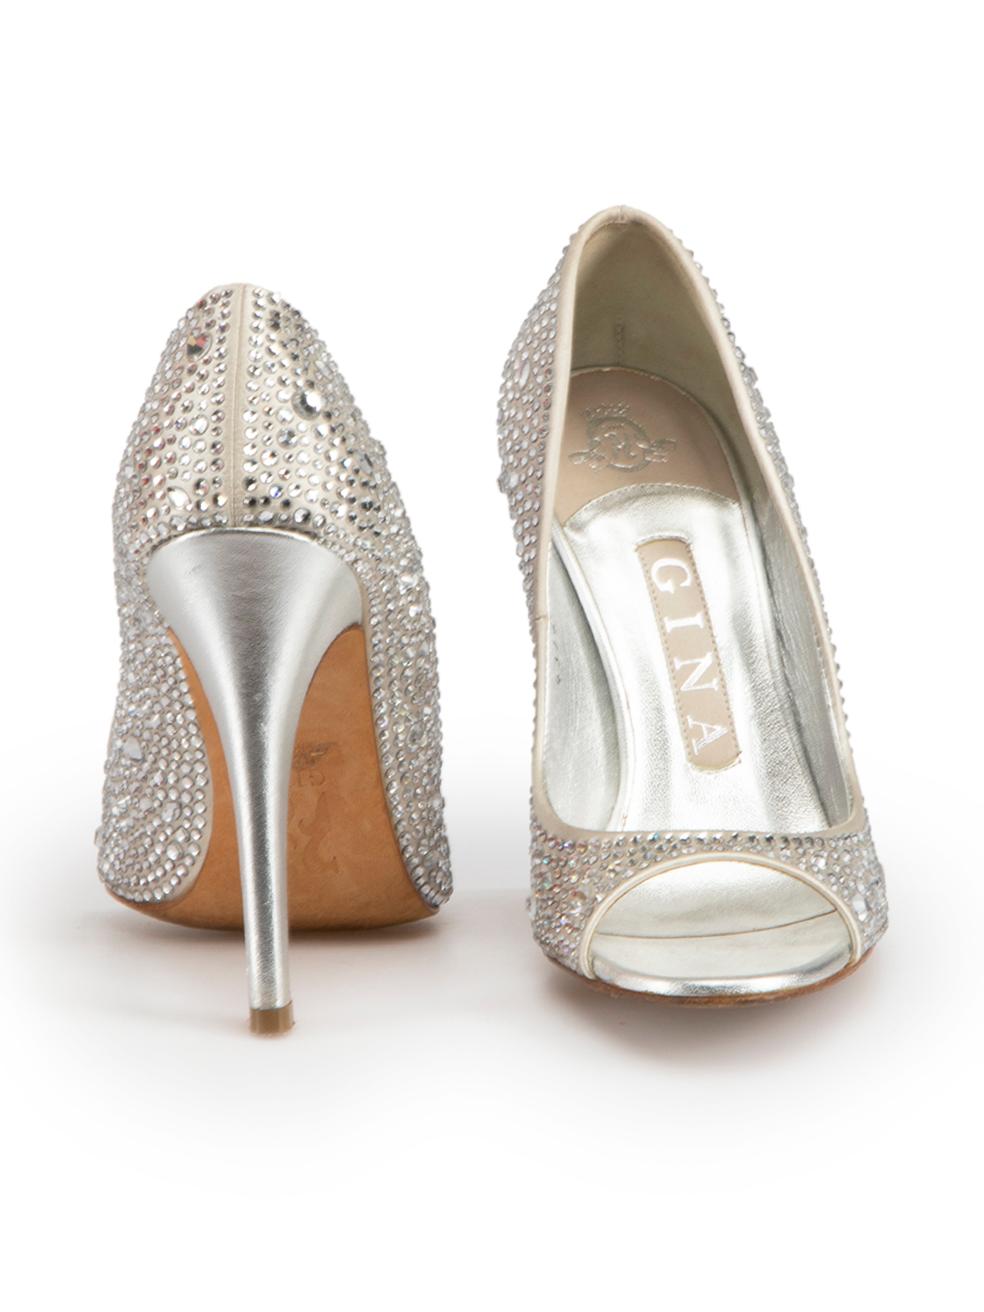 Gina Silver Crystal Embellished Open Toe Heels Size UK 3.5 In Excellent Condition For Sale In London, GB